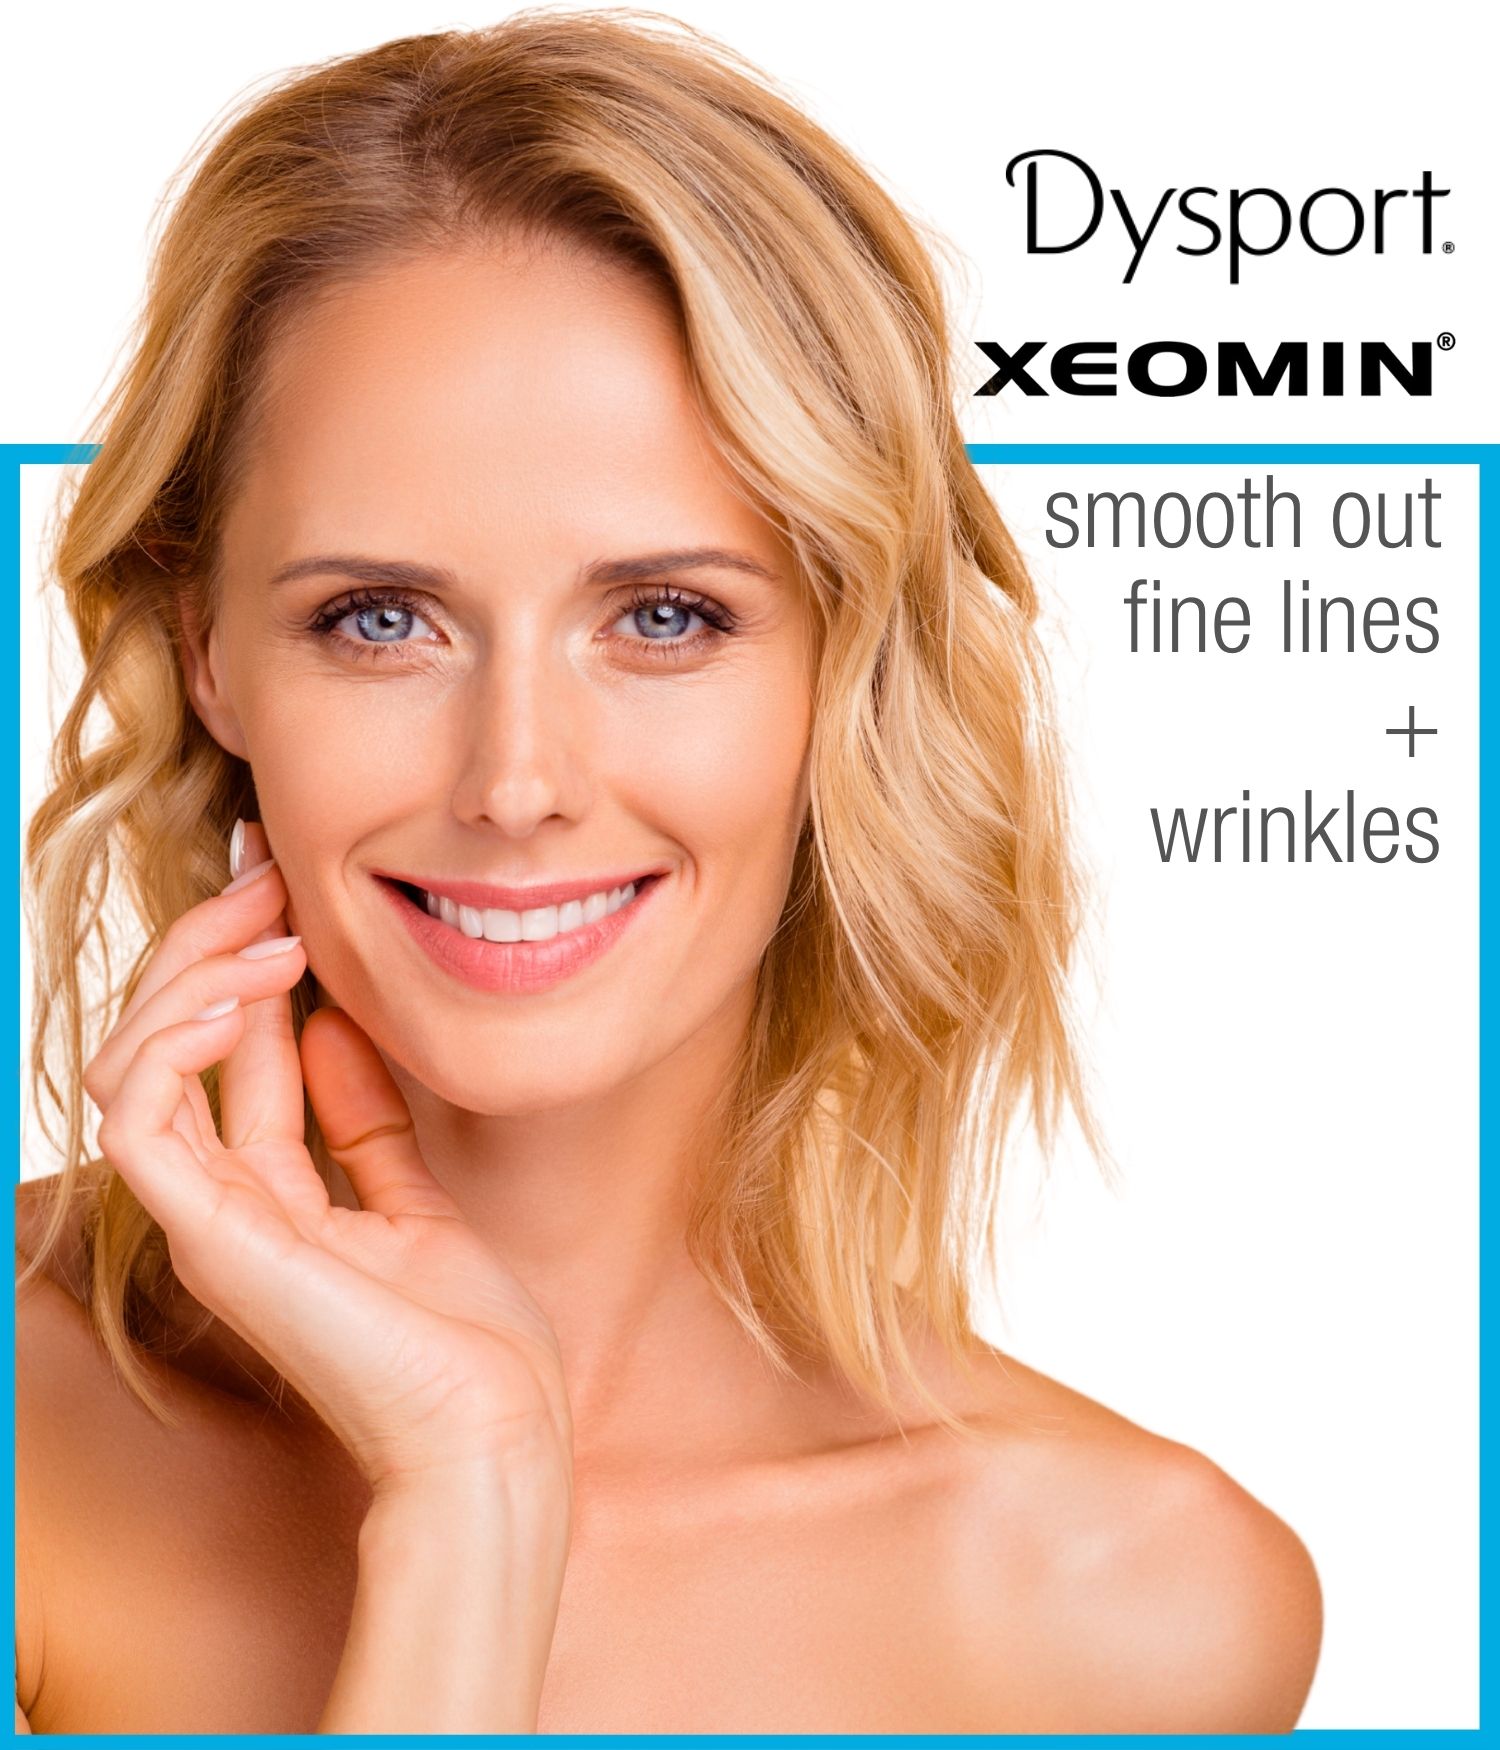 Woman with youthful appearance after Dysport & Xeomin treatment in Goldsboro, NC at ABM Wellness.